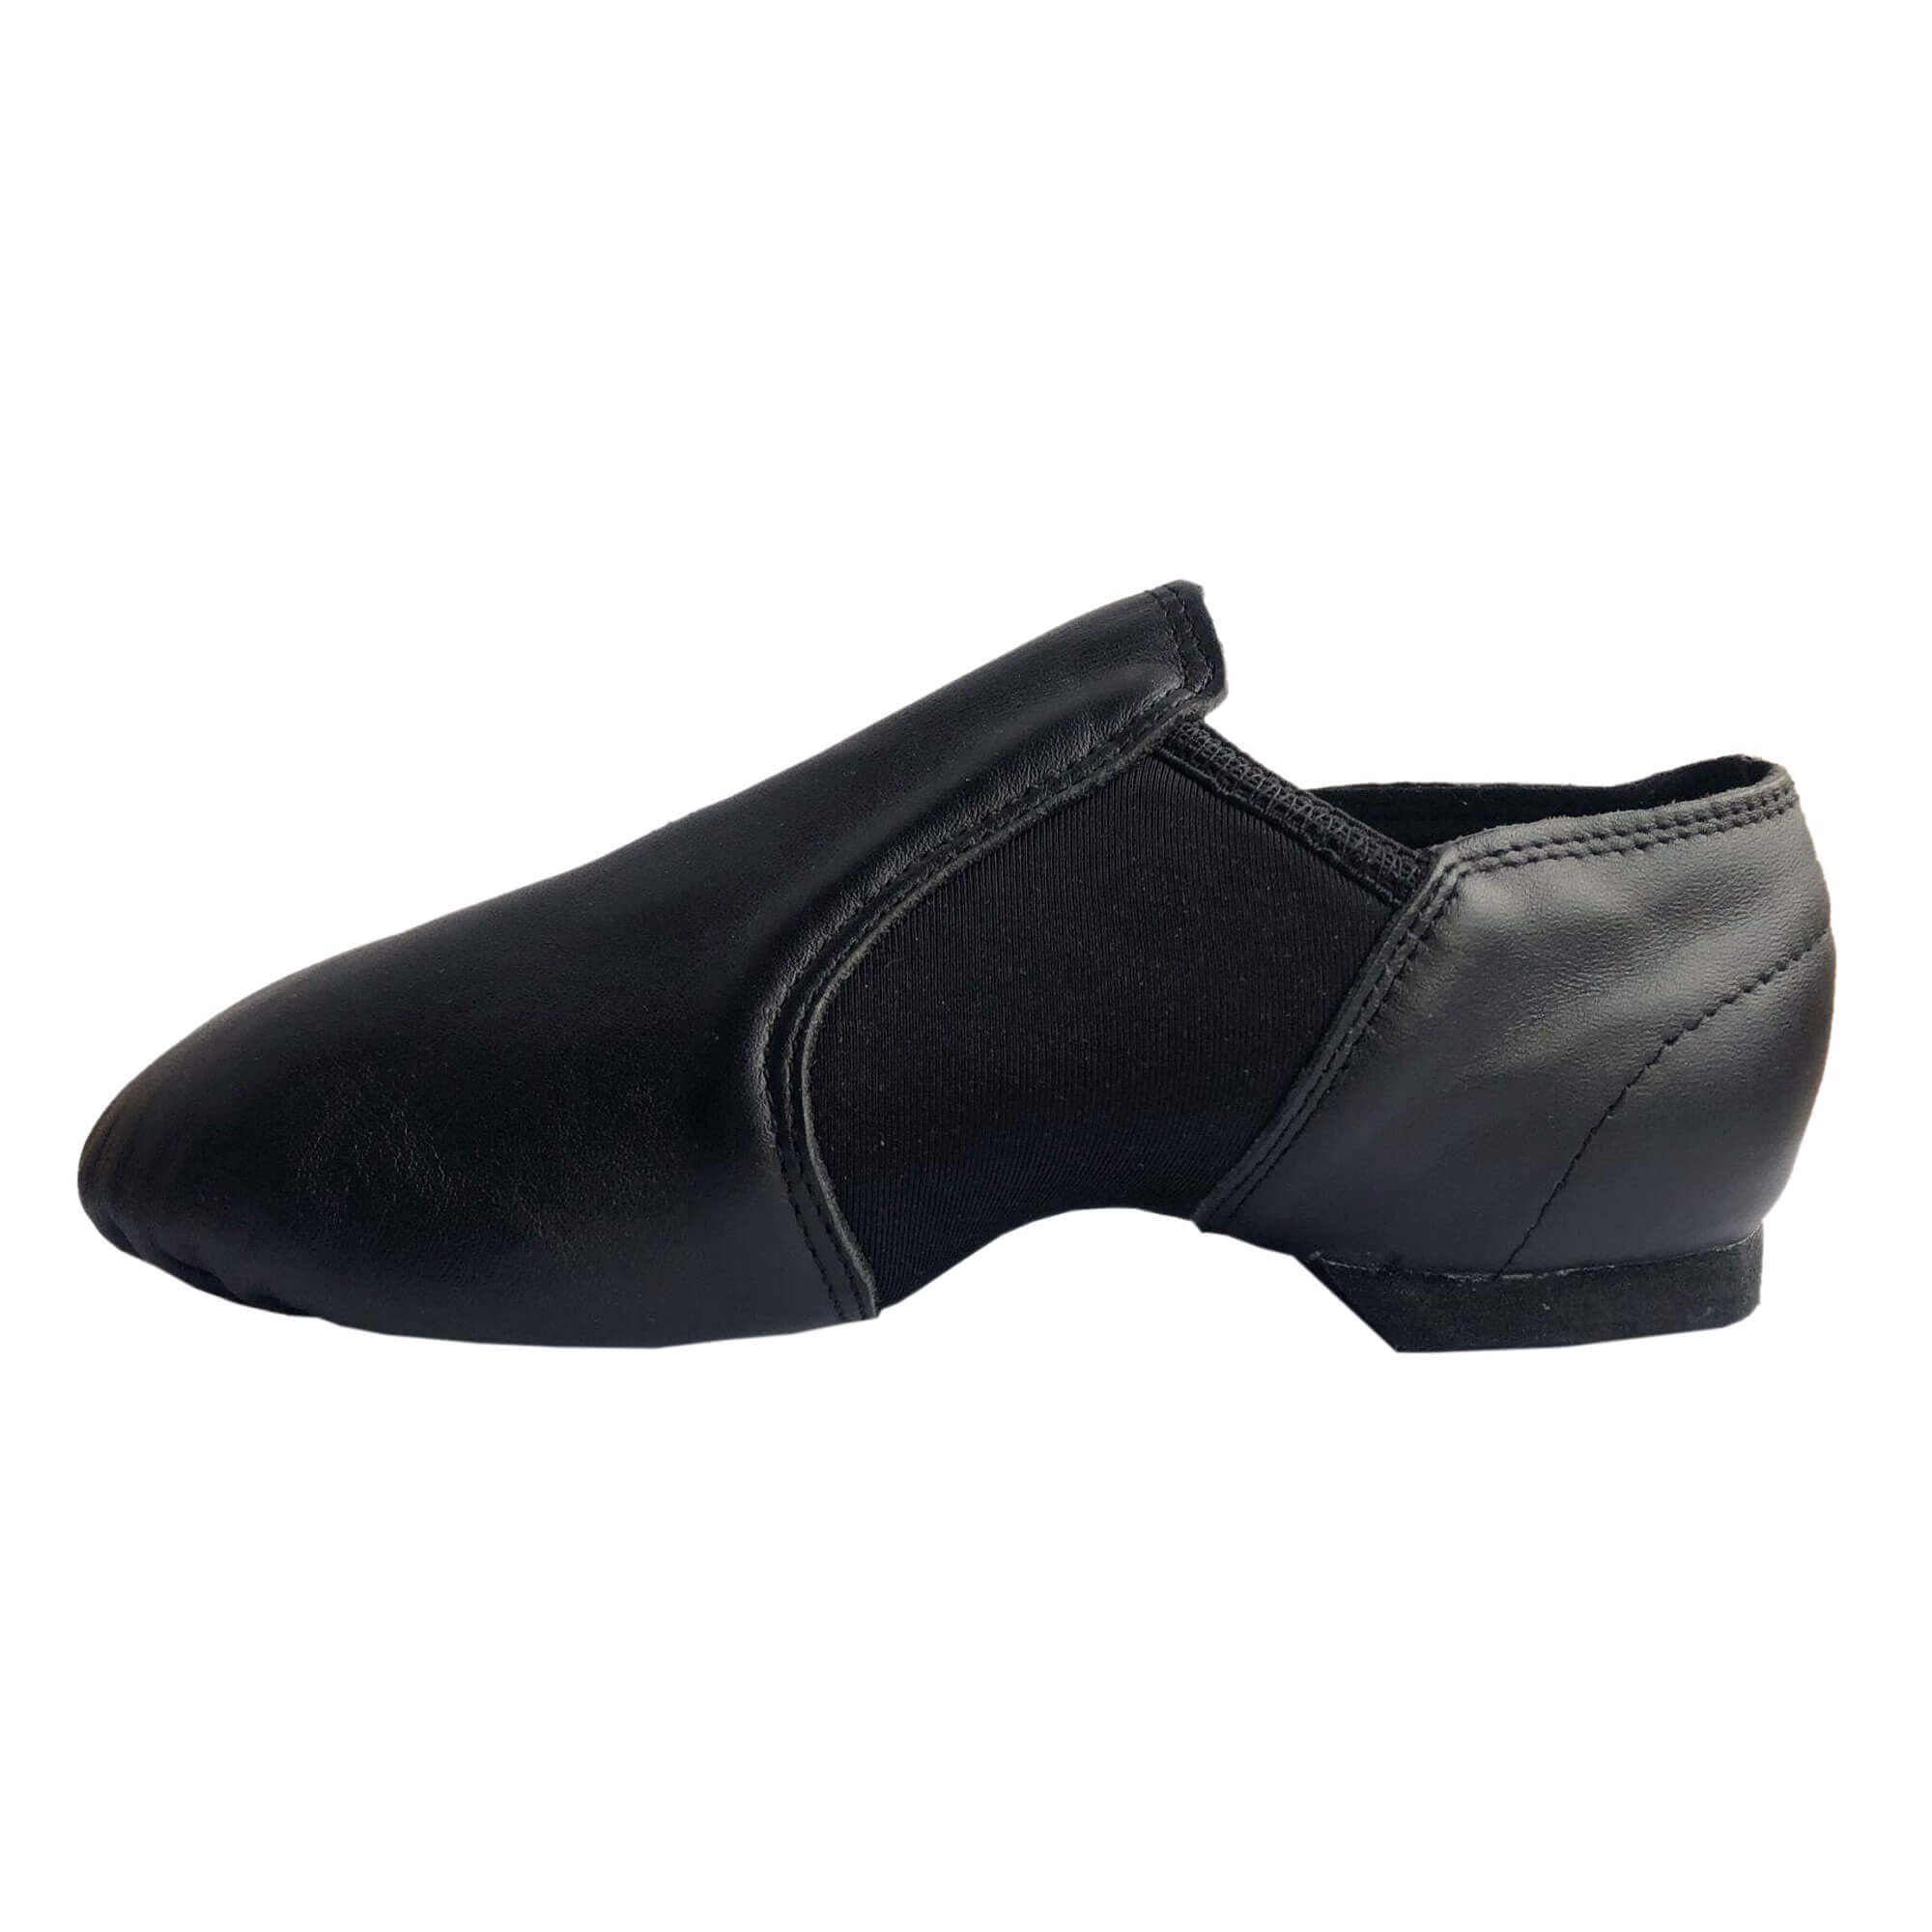 Danzcue Adult Leather Upper Slip-On Jazz Dance Shoes - Click Image to Close